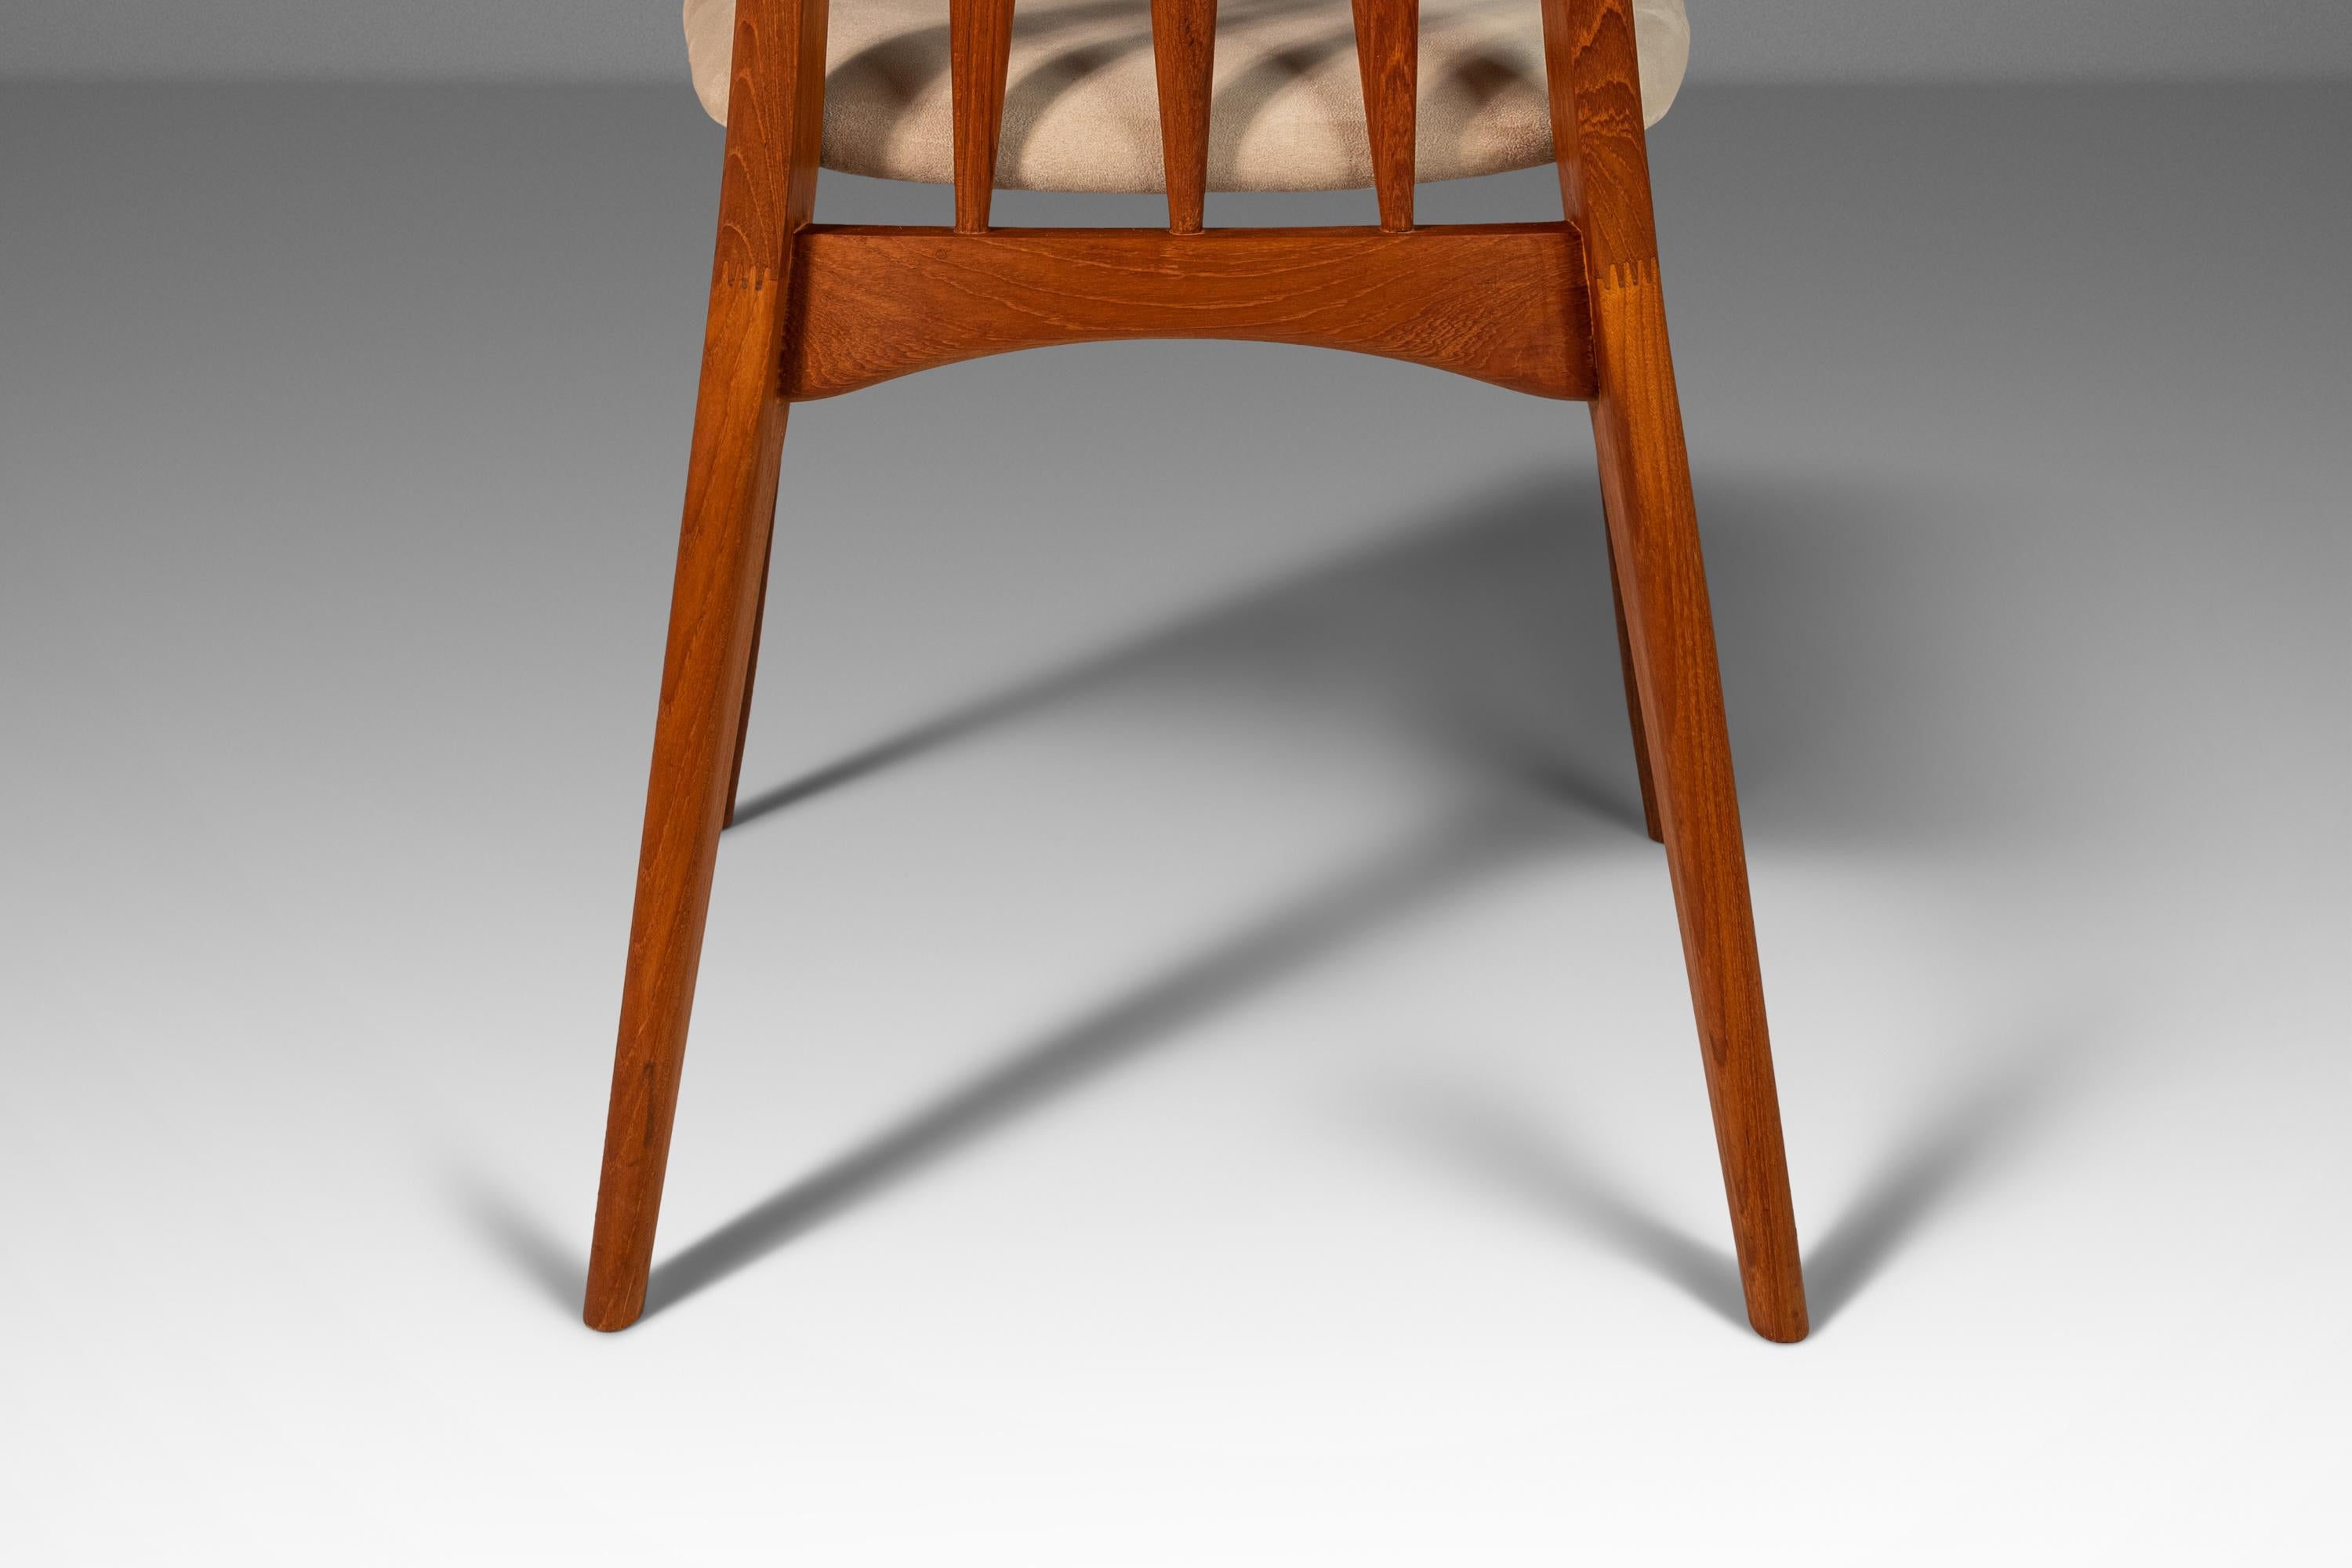 Set of Six (6) Teak Eva Dining Chairs by Niels Koefoed for Koefoeds Hornslet 60s For Sale 4